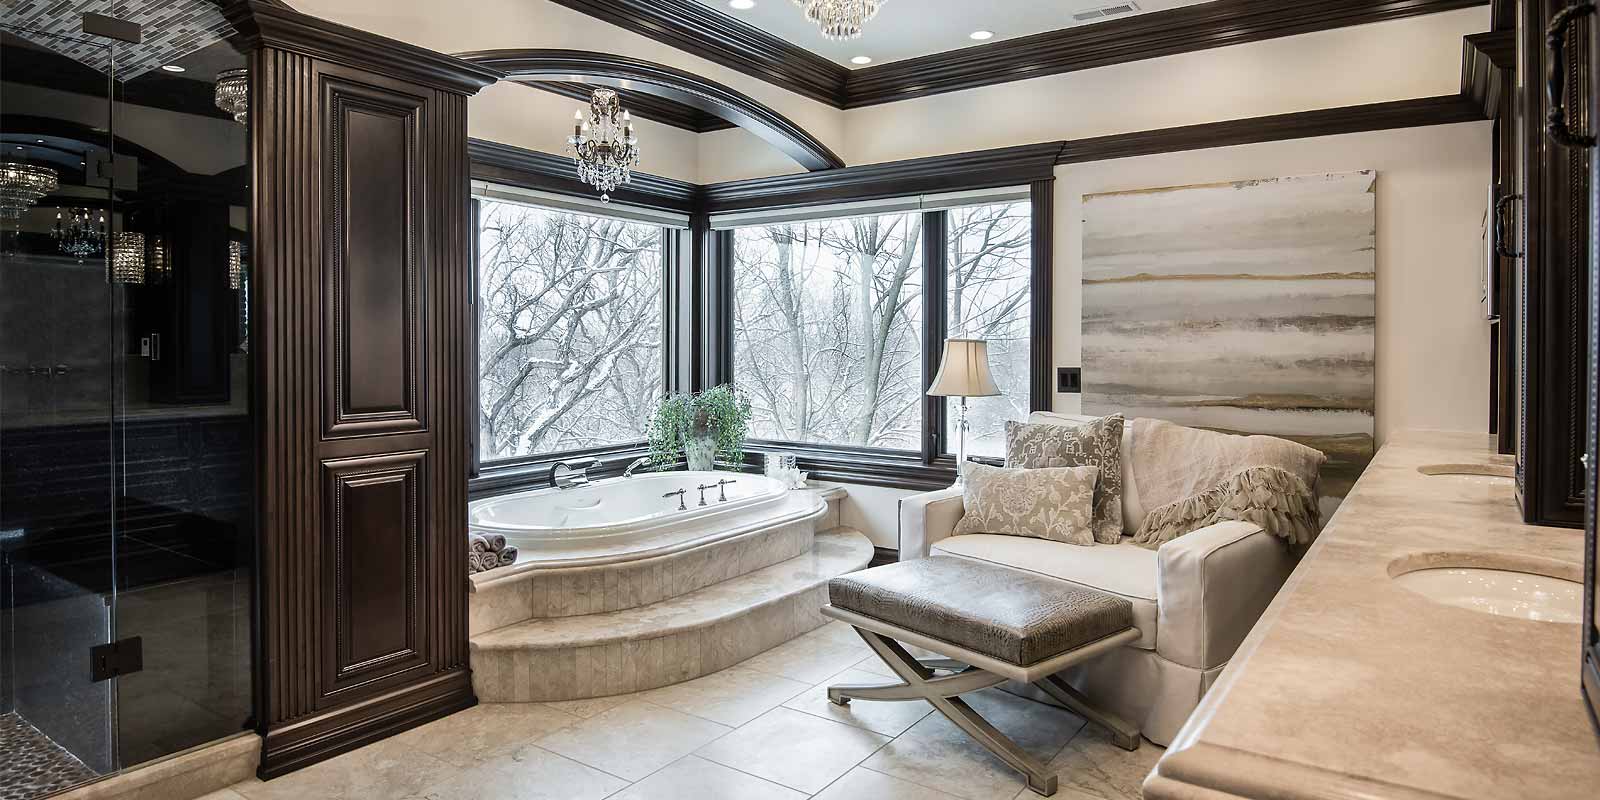 Elegant master suite bathroom remodel with ornate traditional moldings, arches, large soaking tub designed and built by Silent Rivers, Des Moines, Iowa